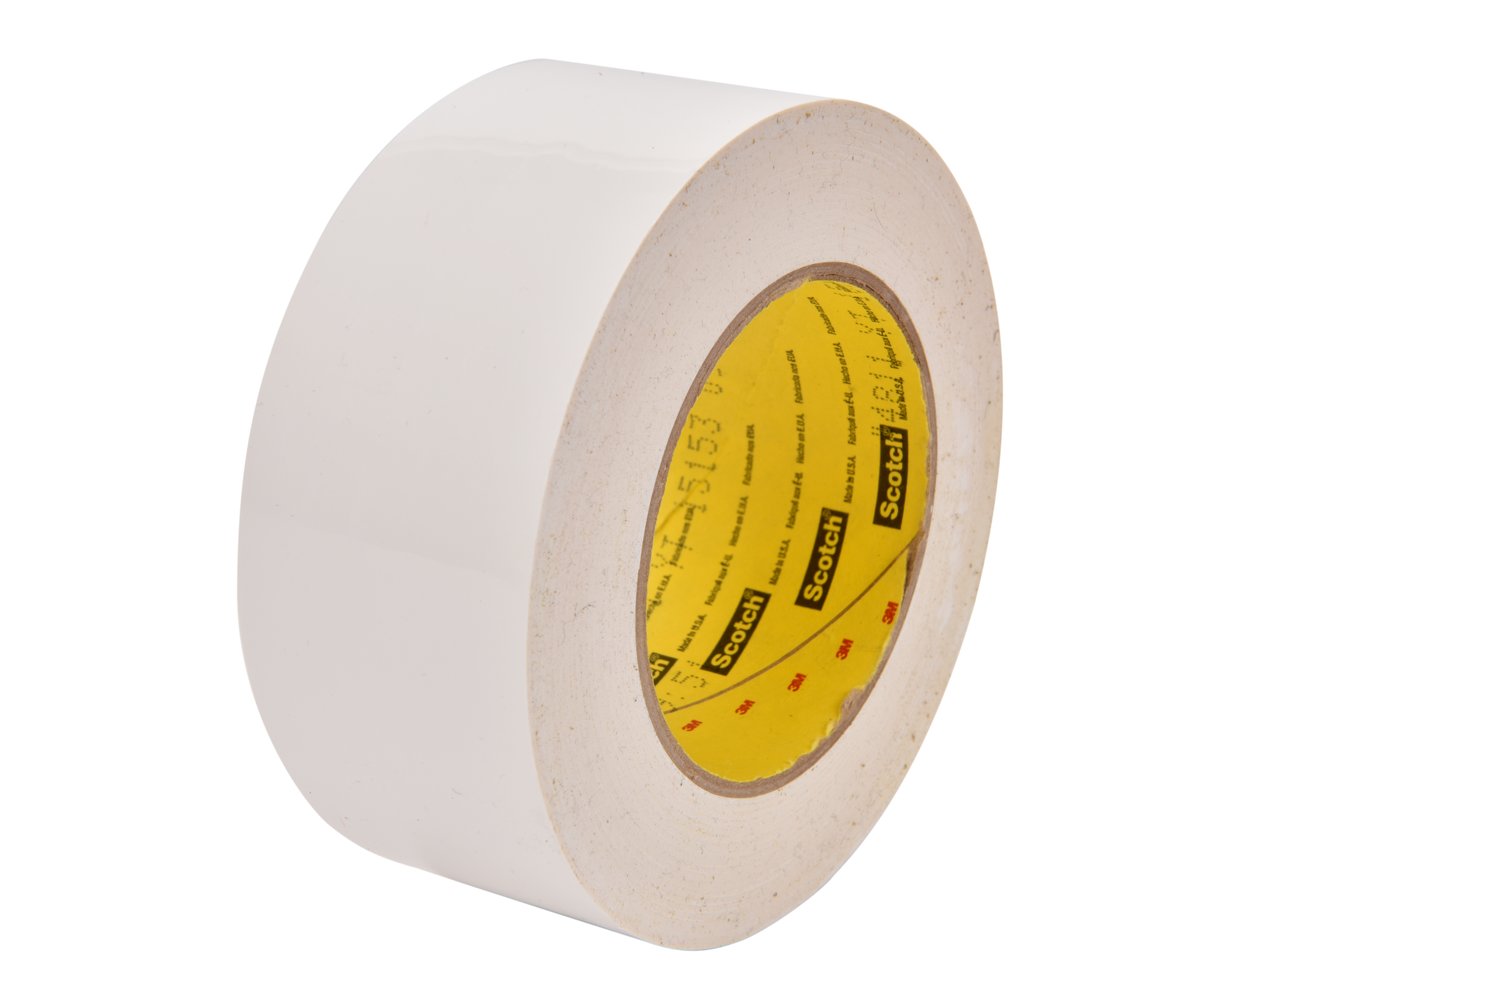 7000028950 - 3M Preservation Sealing Tape 4811, White, 4 in x 36 yd, 9.5 mil, 12
rolls per case